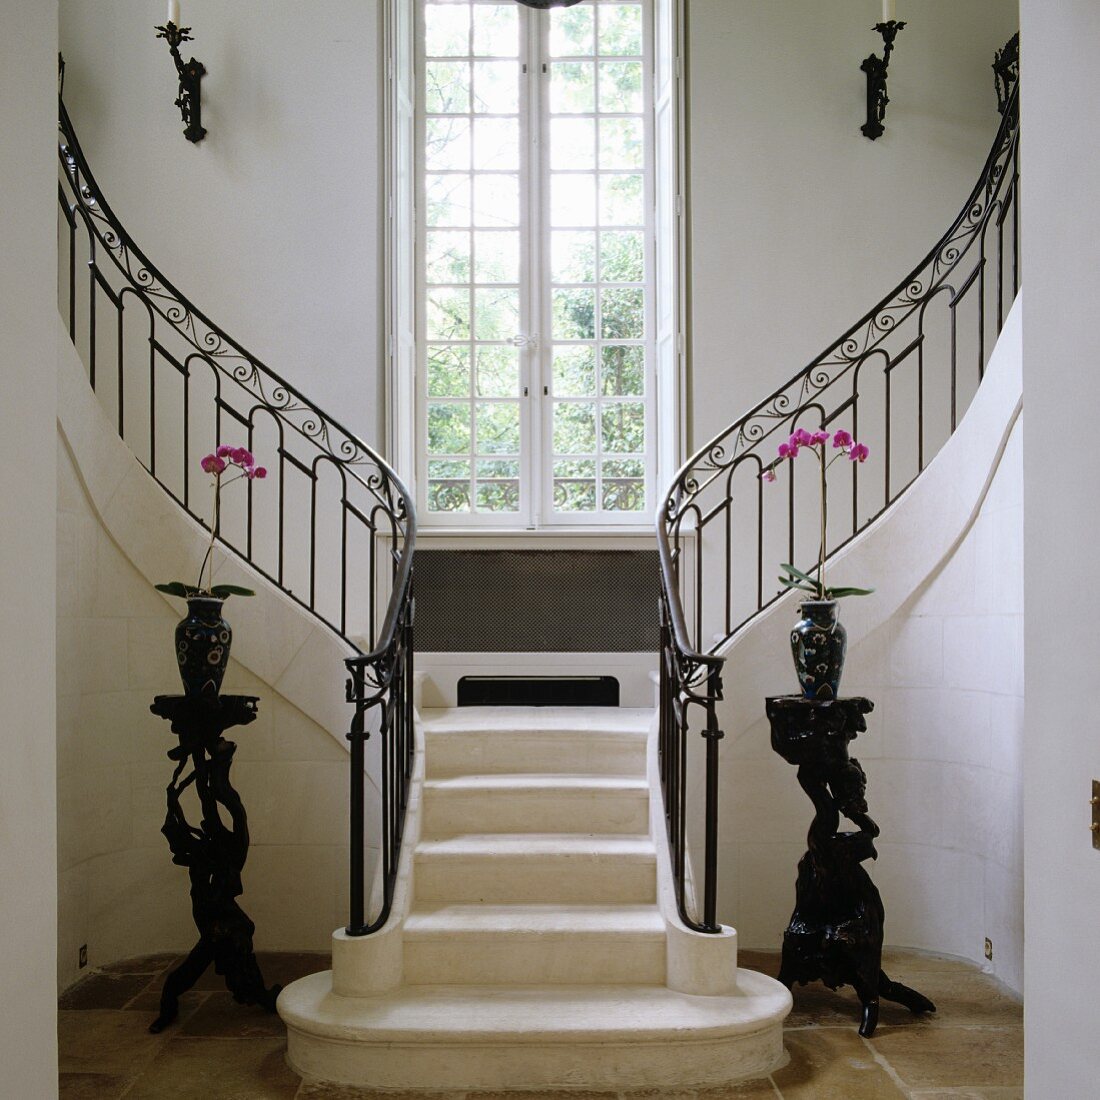 Foyer of Mediterranean country house with central steps leading to two staircases